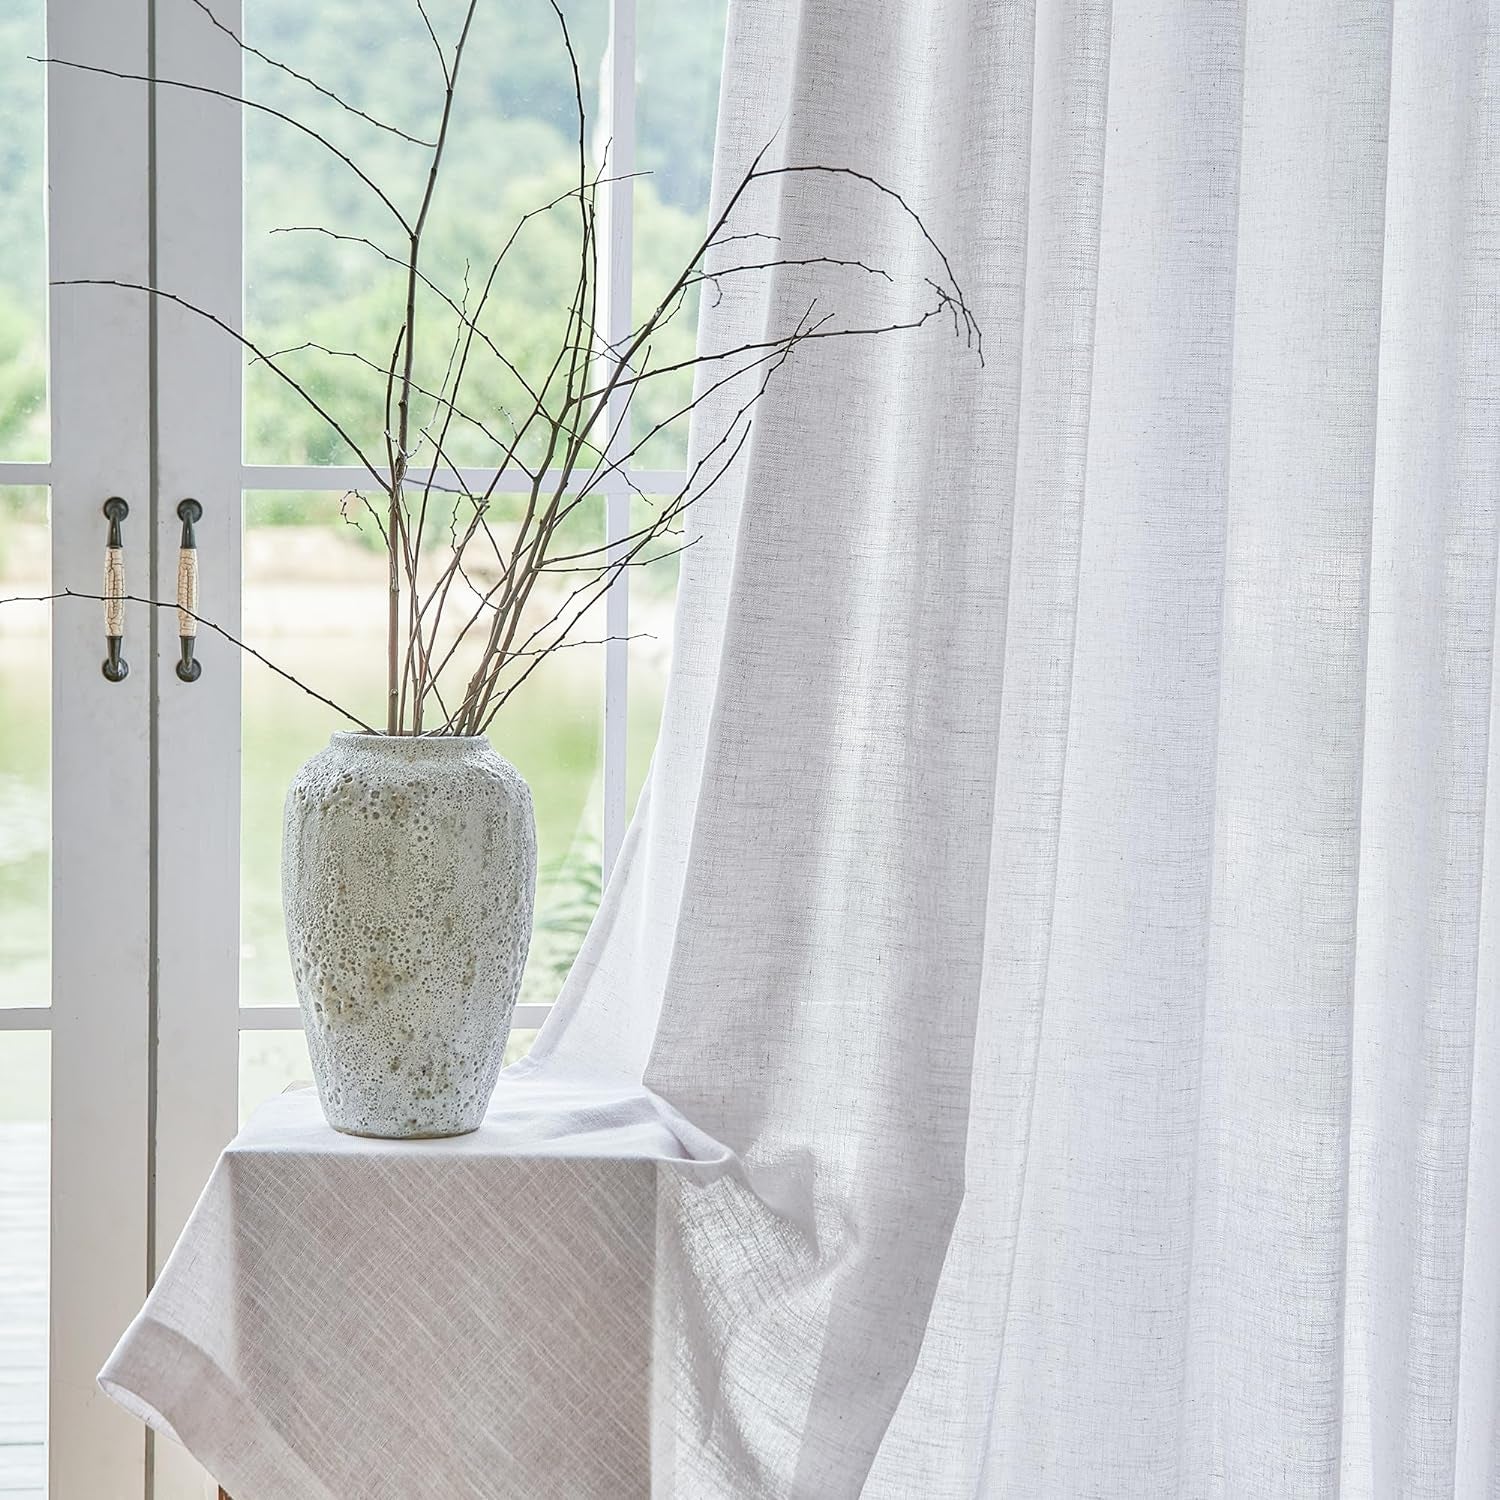 HUTO Extra Wide Pinch Pleated Semi Sheer Curtains, Privacy Light Filtering Beige White Linen Pinch Pleat Drapes 96 Inch Length for Patio Door Living Room Bedroom with Hooks (1 Panel, 100 W X 96 L)  HUTO   